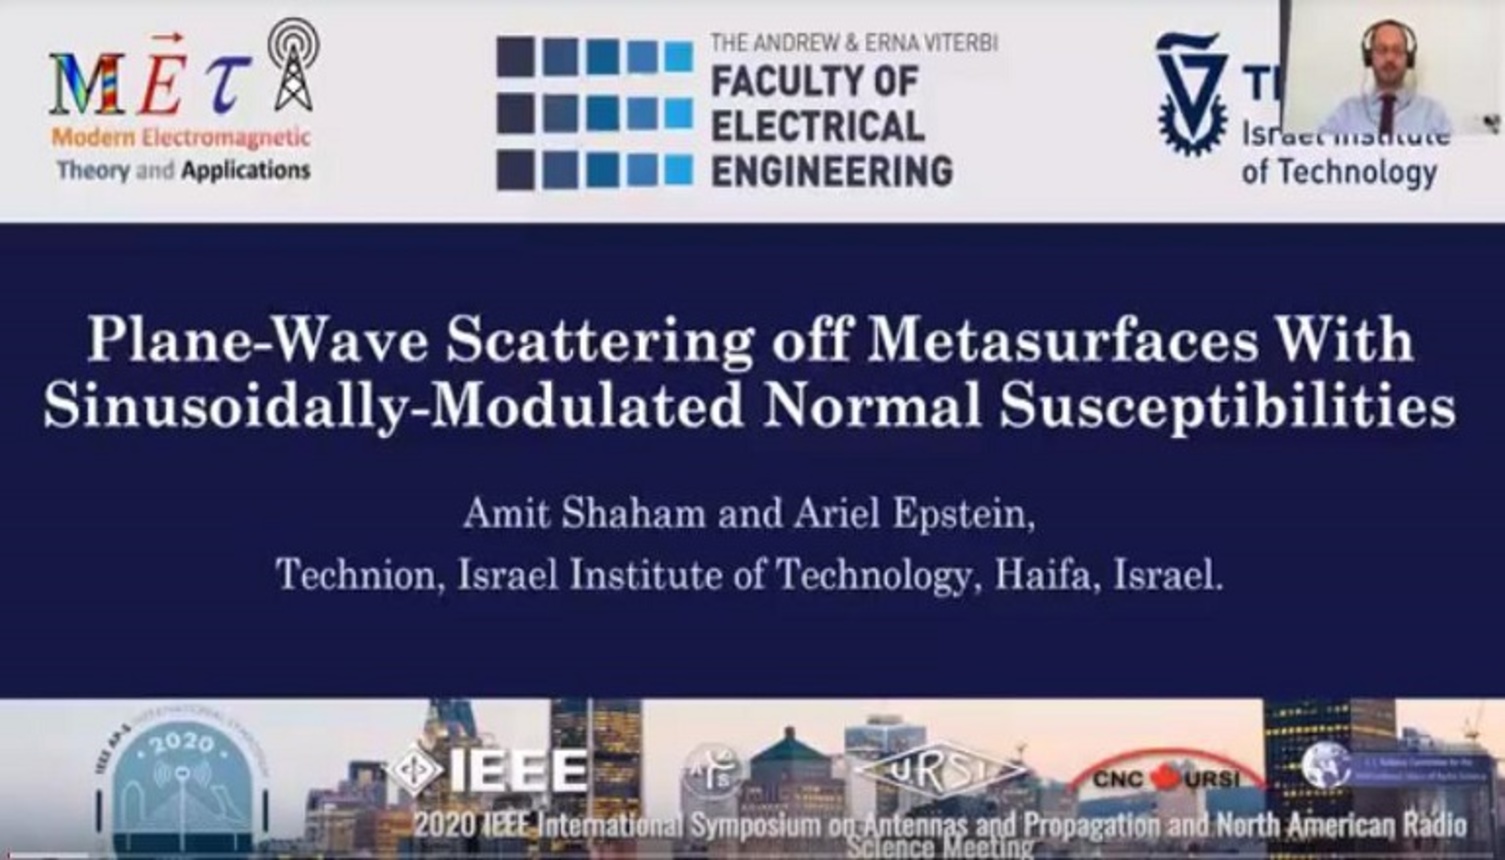 Plane-Wave Scattering Off Metasurfaces with Sinusoidally-Modulated Normal Susceptibilities Video